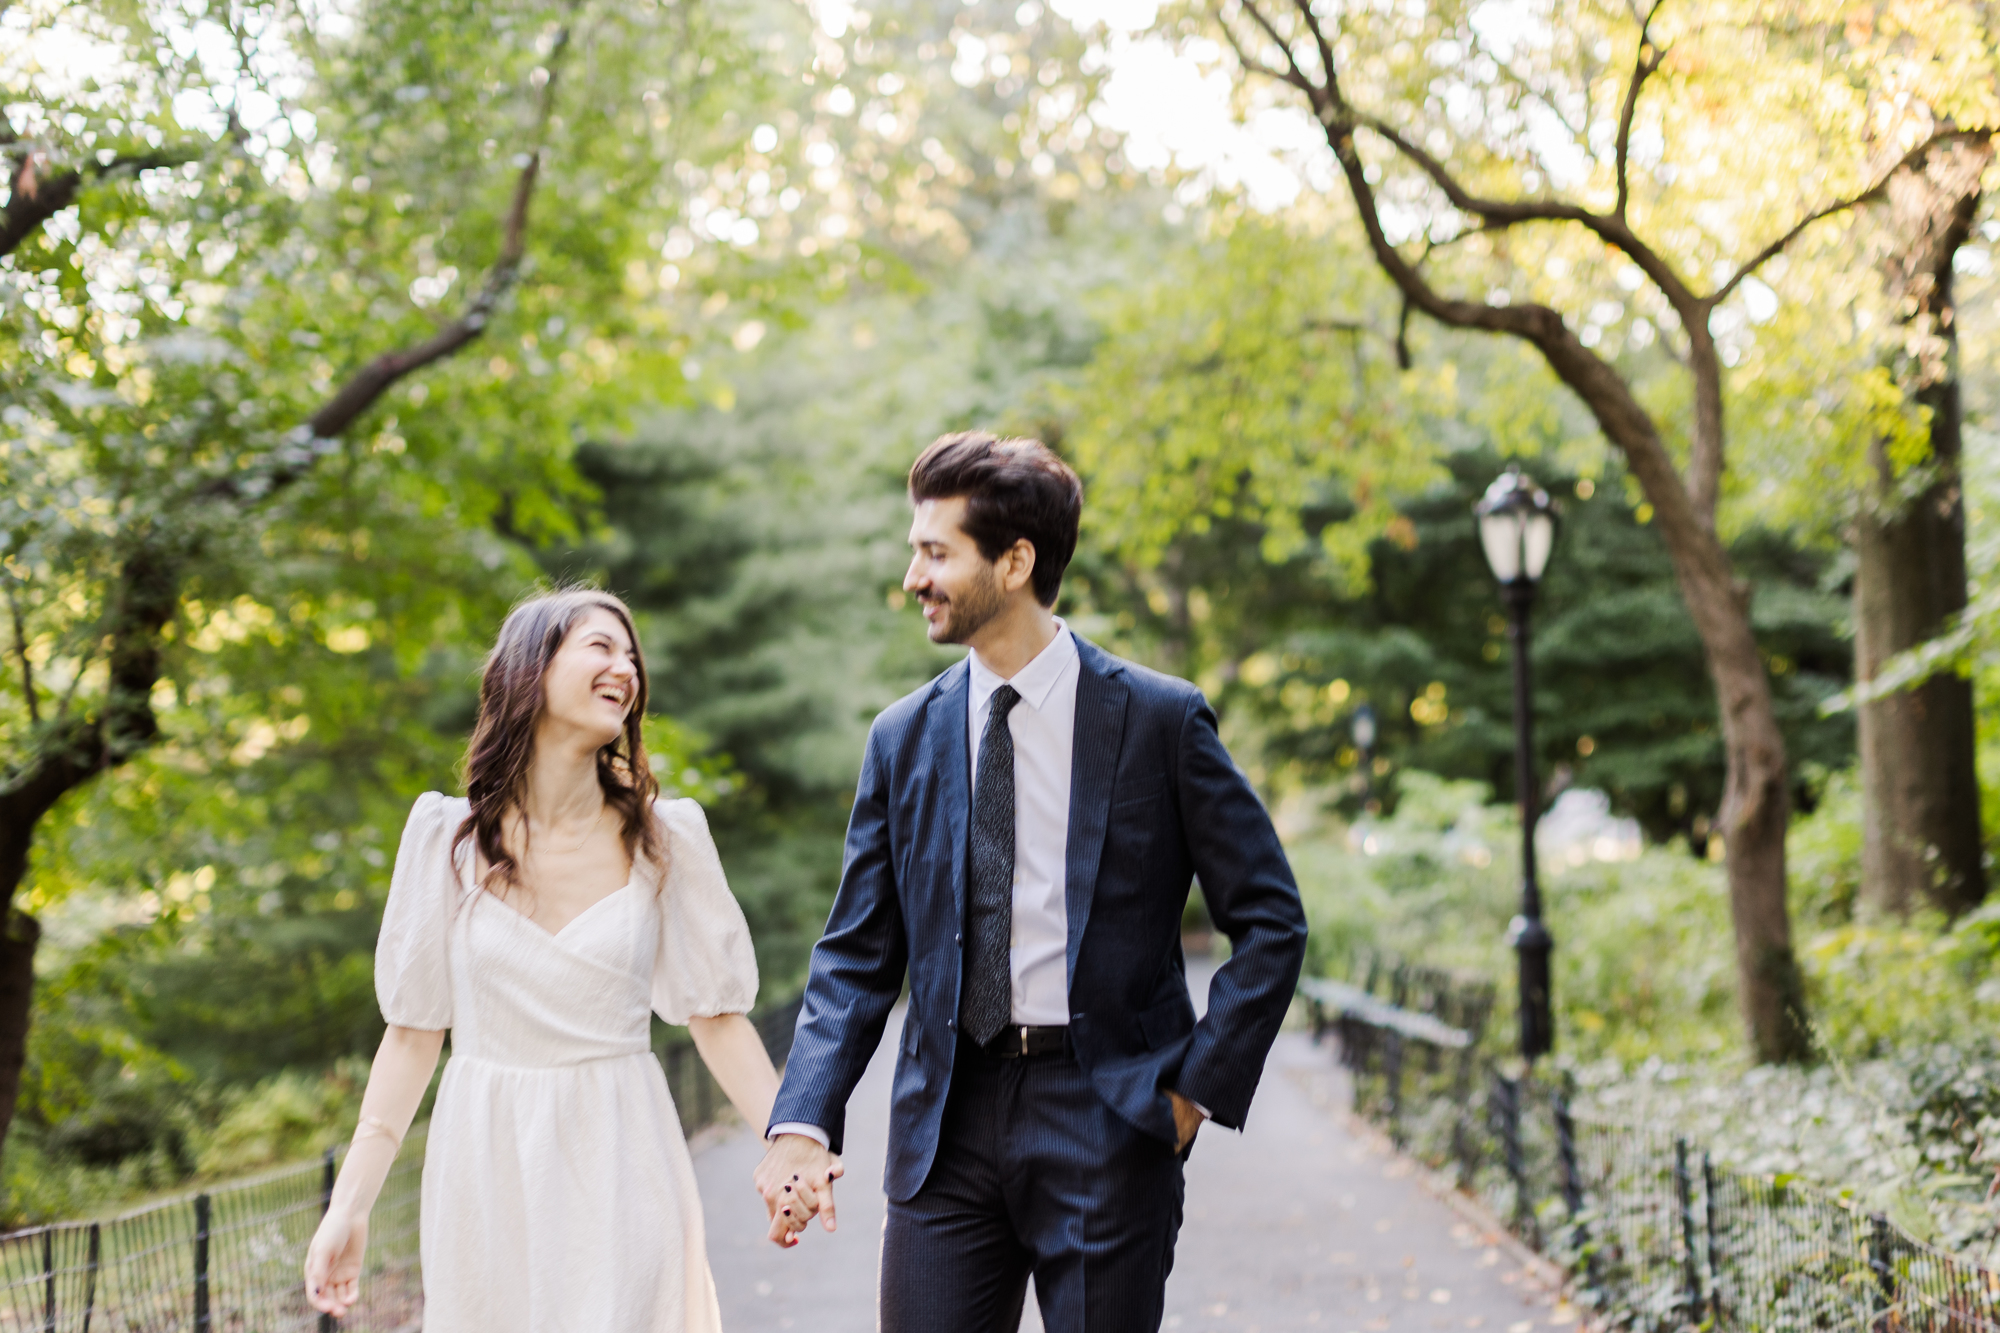 Intimate Central Park Engagement Photos in NYC